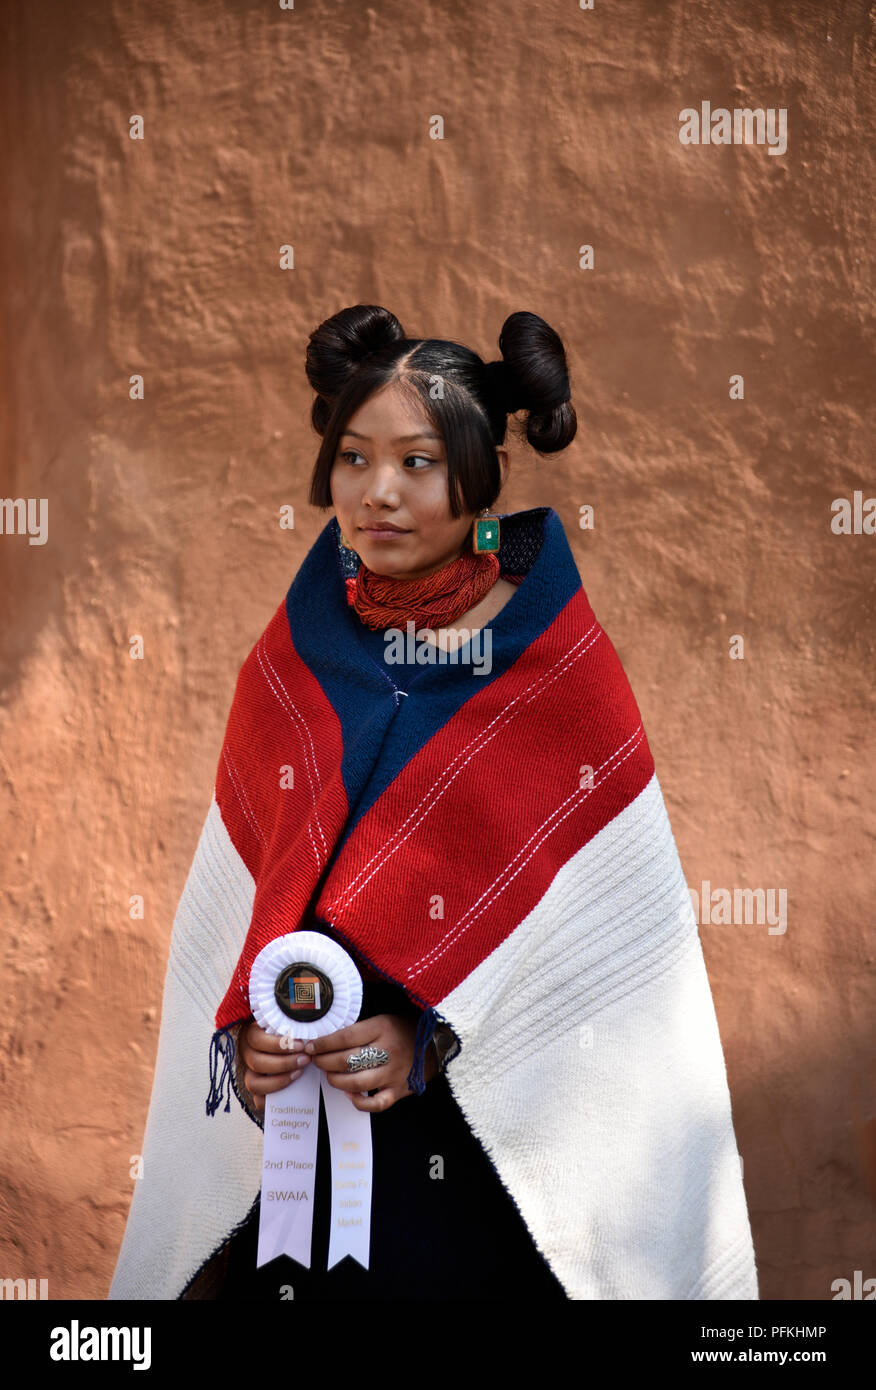 A young Native-American (Hopi) woman wearing traditional Hopi clothing, jewelry and hairstyle at the Santa Fe Indian Market. Stock Photo